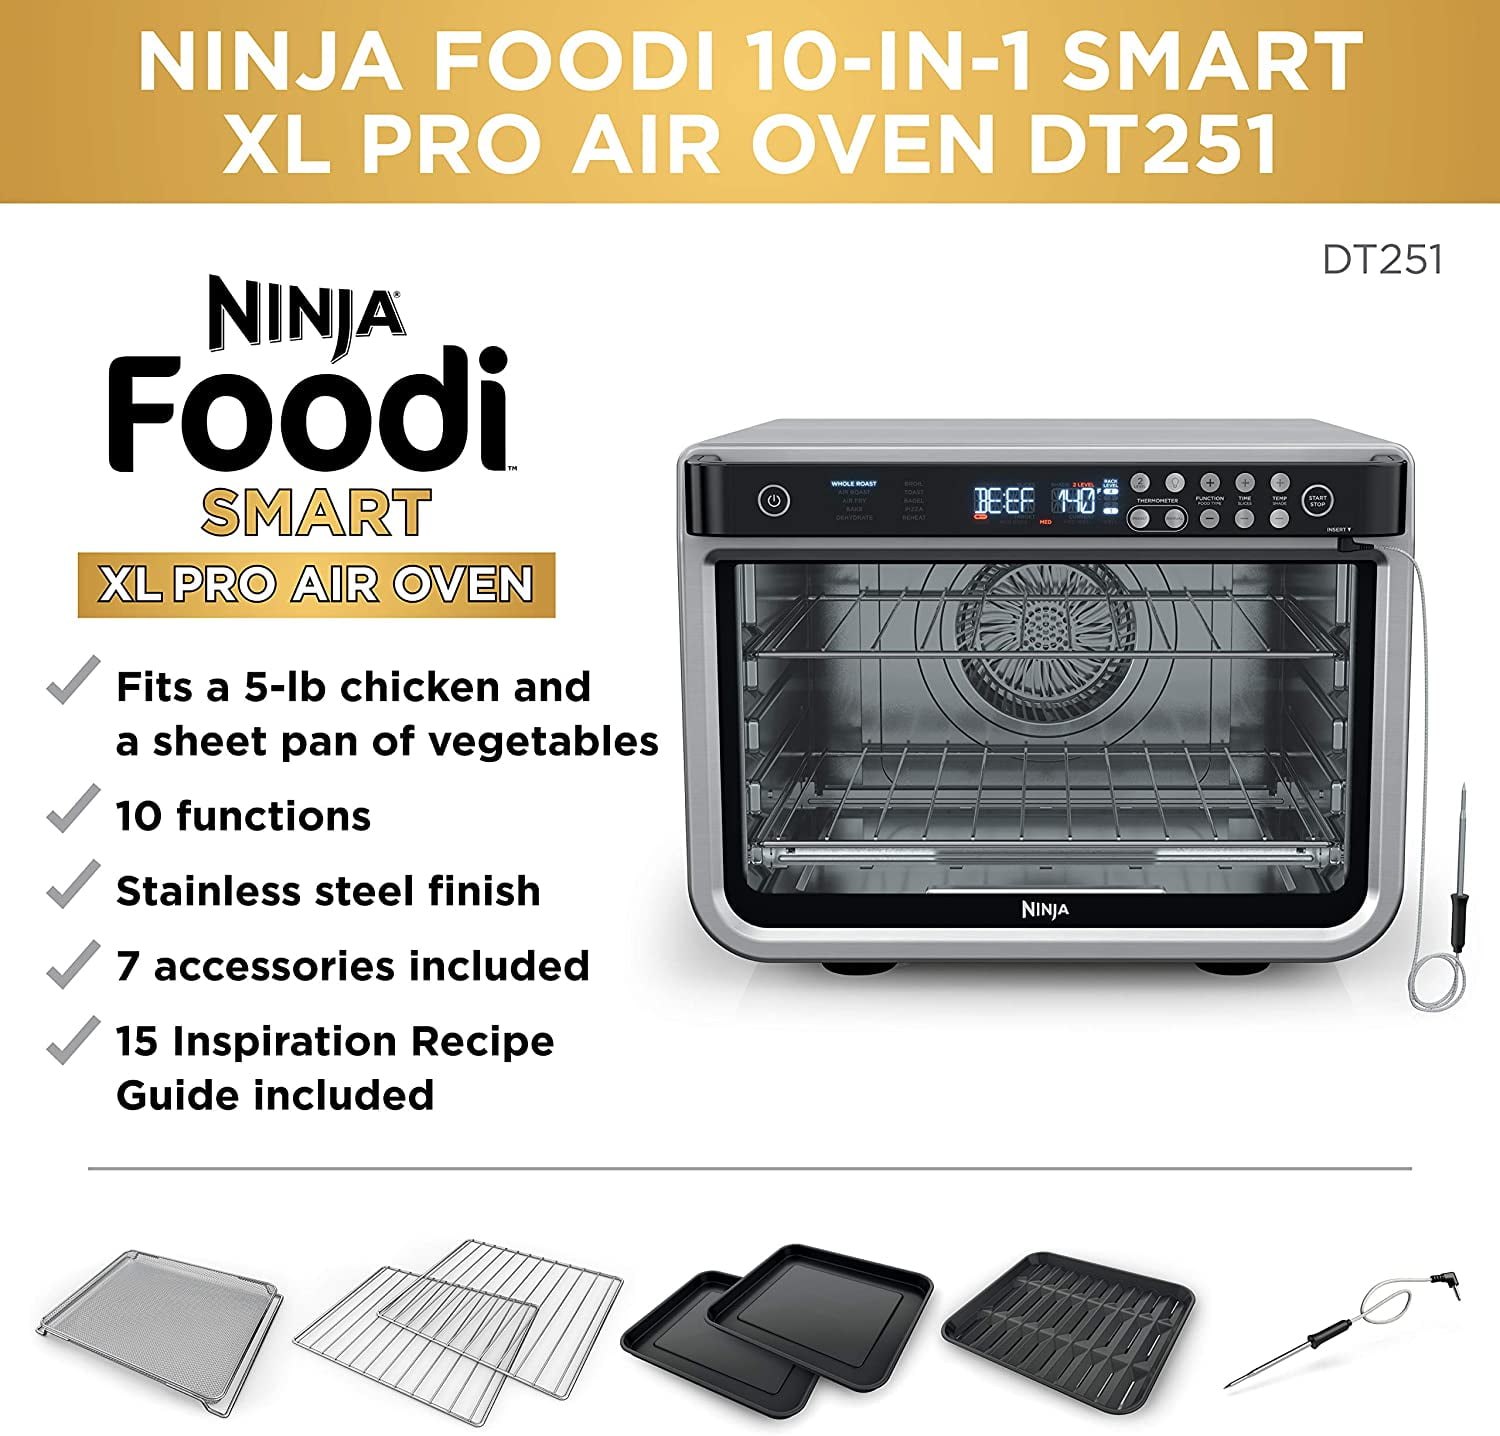 Ninja Foodi 10-in-1 XL Pro REVIEW AND EASY-DEMO FOR EVERYONE 